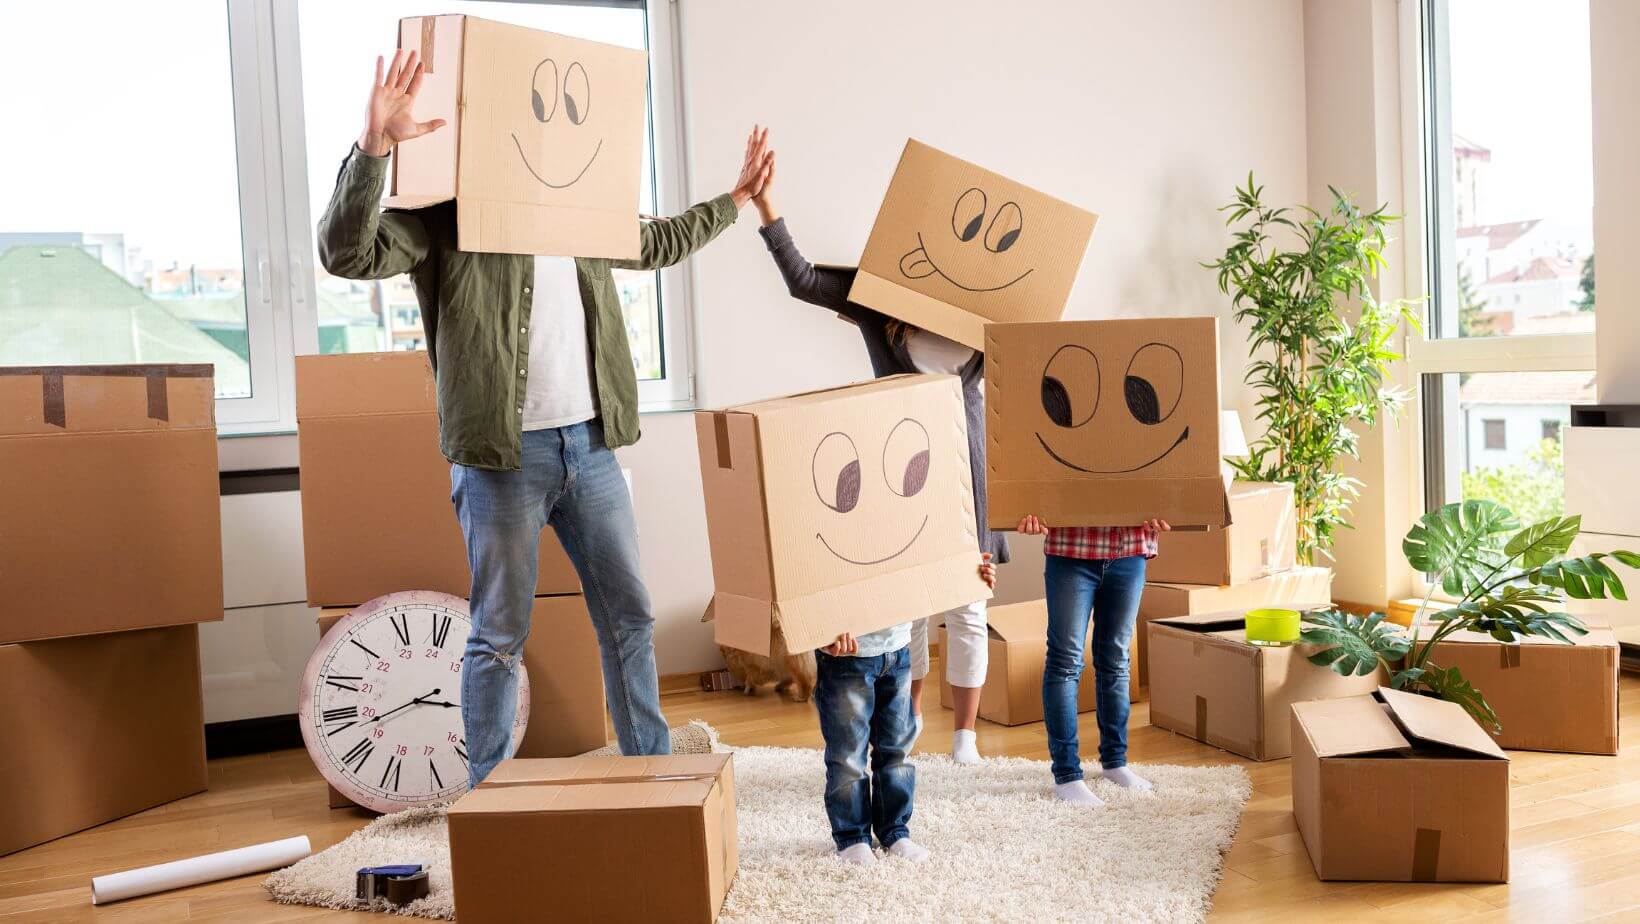 A family surrounded by boxes and have boxes on their heads with smiley faces.